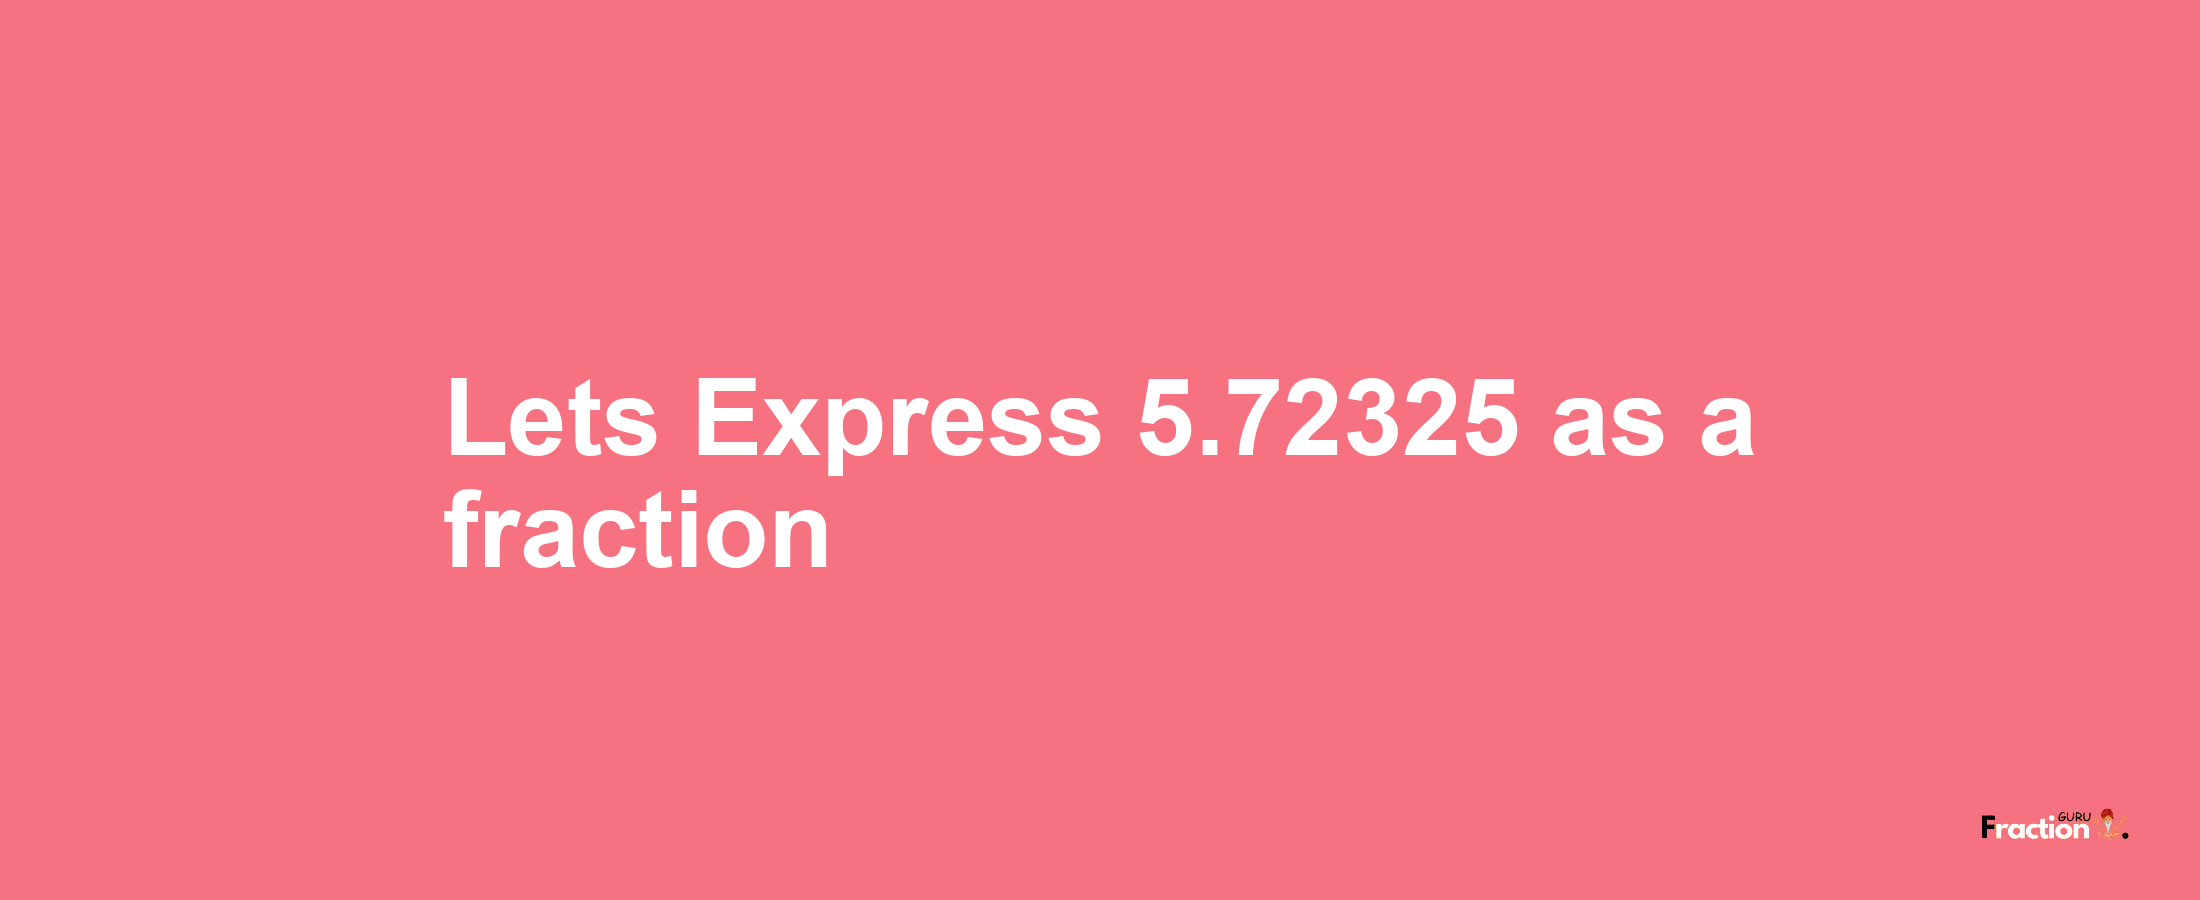 Lets Express 5.72325 as afraction